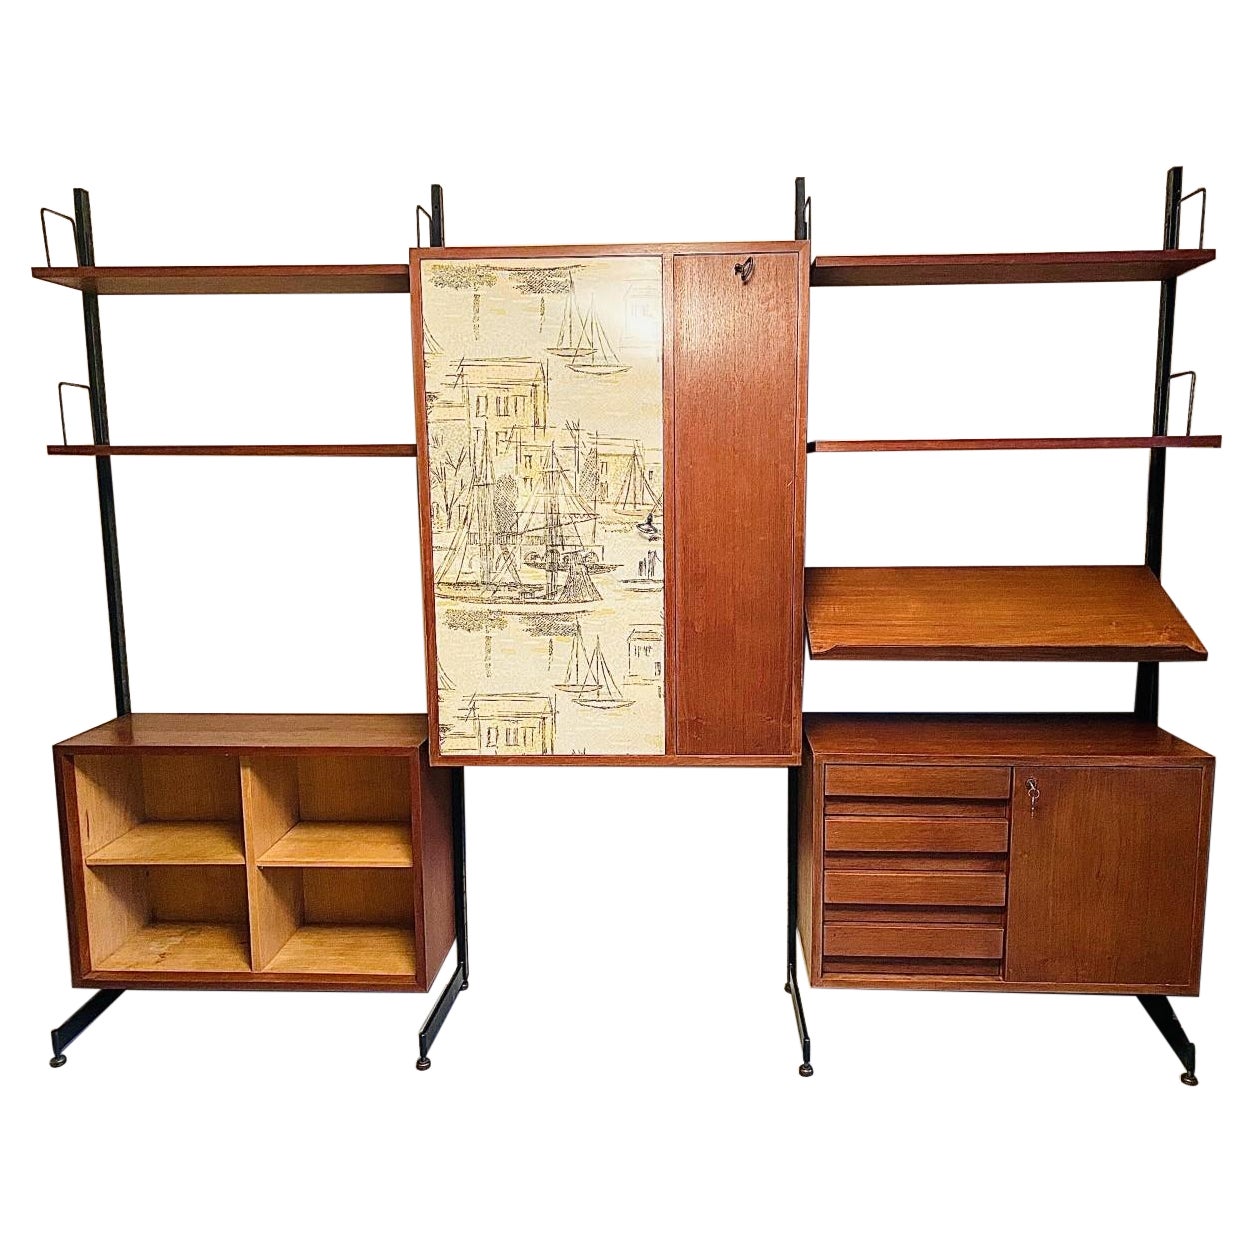 Multi Storage Functional Italian Shelving System Room Divider with Art Work For Sale